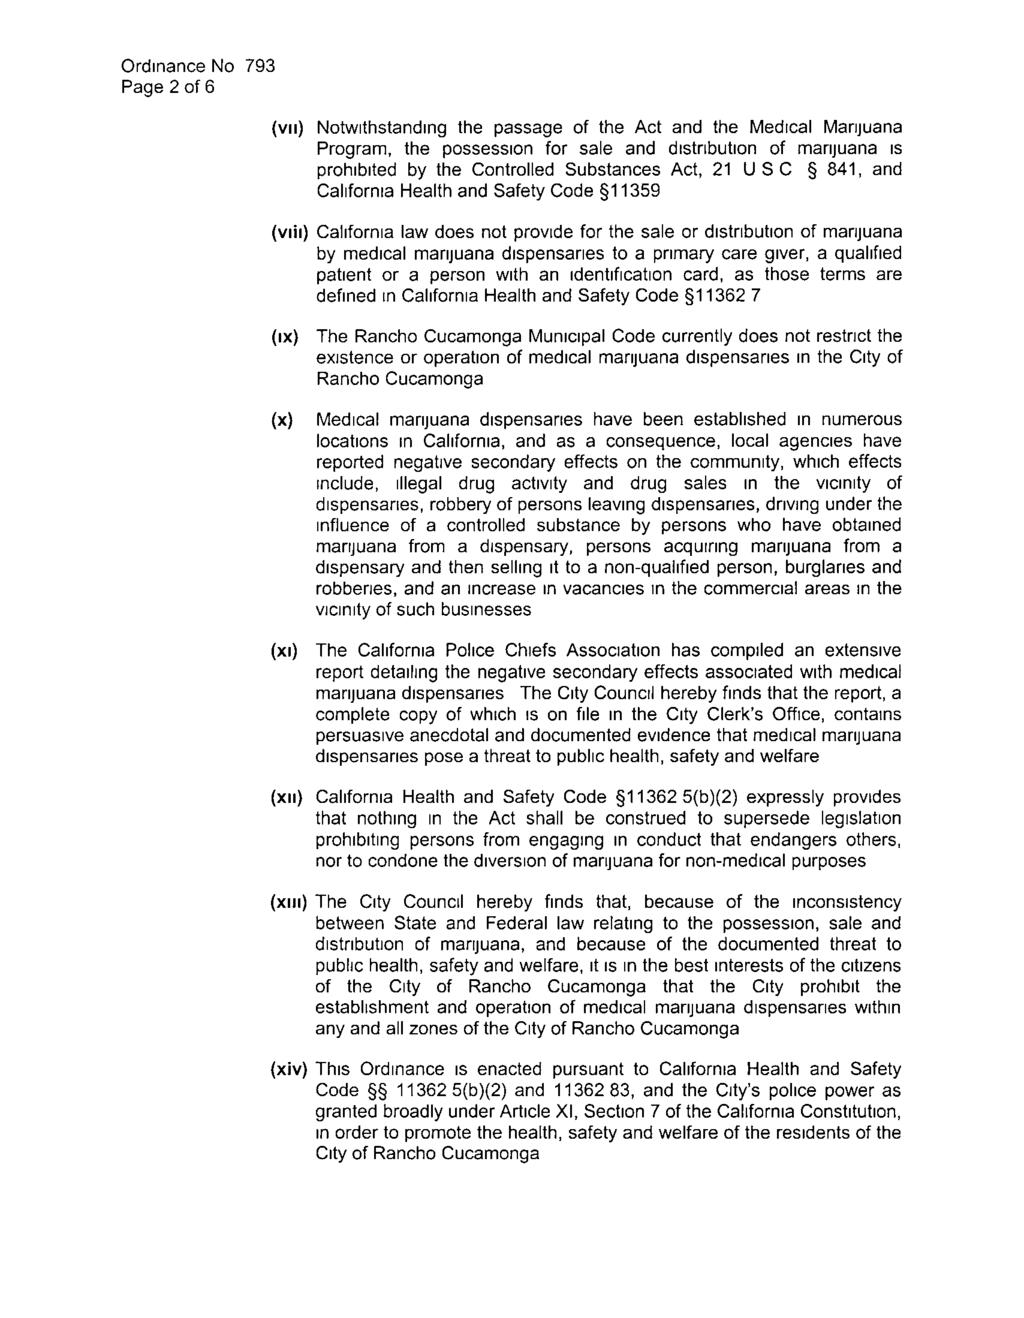 Page 2 of 6 vii Notwithstanding the passage of the Act and the Medical Marquana Program the possession for sale and distribution of marquana is prohibited by the Controlled Substances Act 21 U S C